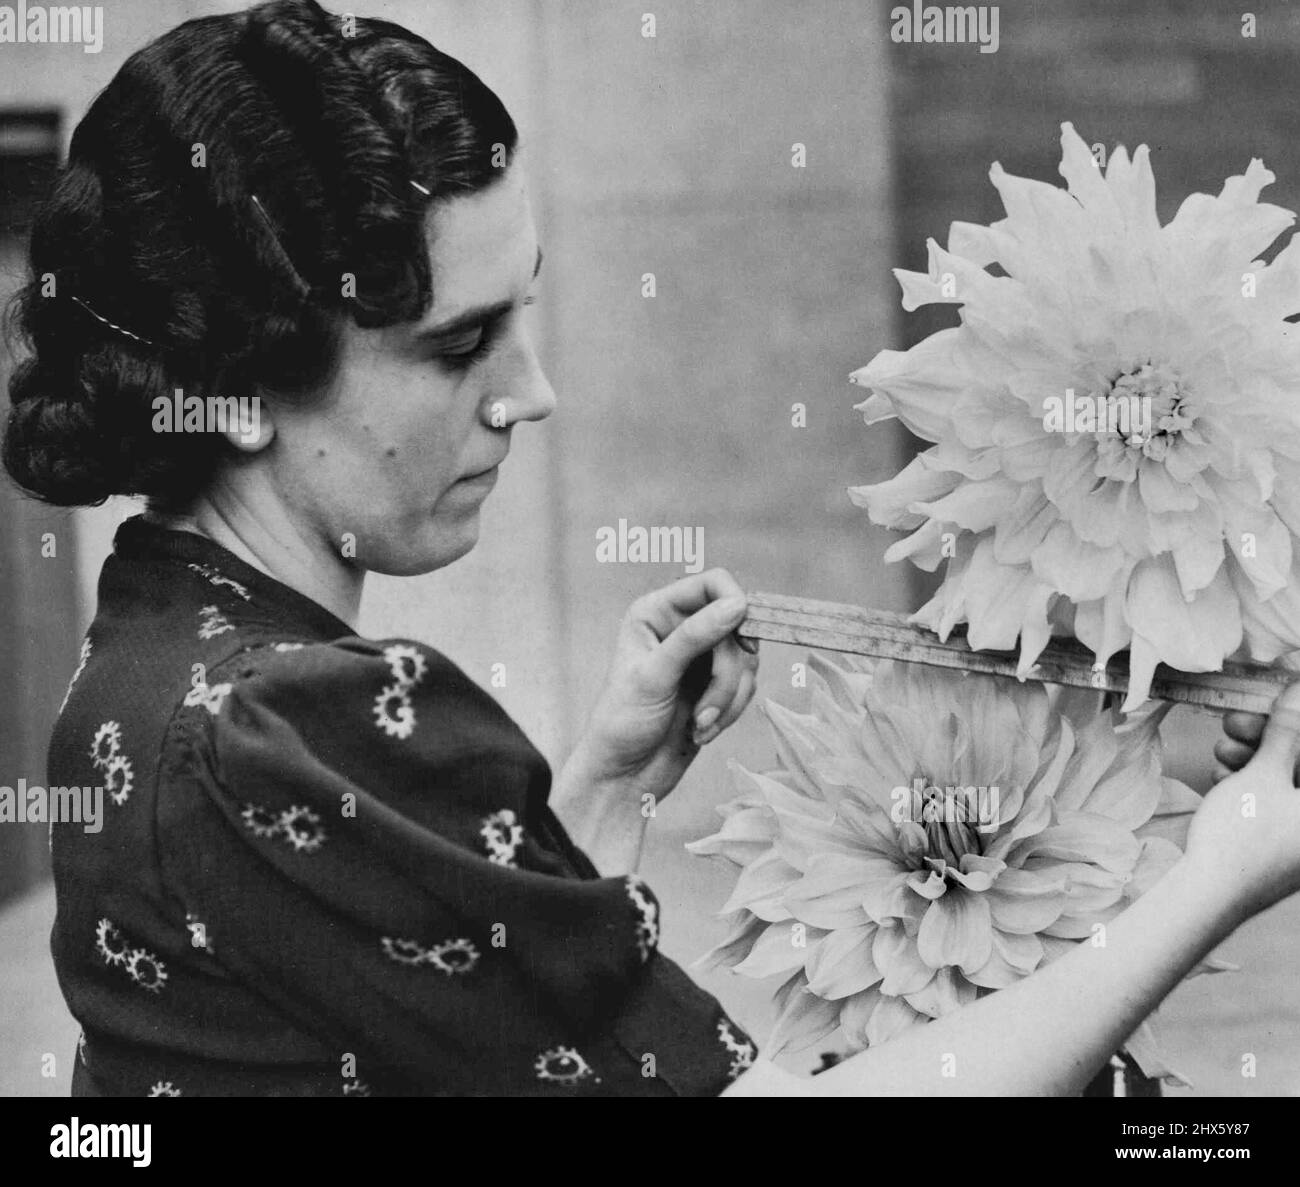 Giant Dahlias On Show -- Measuring giant dahlias at the Royal Horticultural Society's Show of autumn flowers, at Westminster today (Tues.). October 11, 1938. (Photo by LNA) Stock Photo